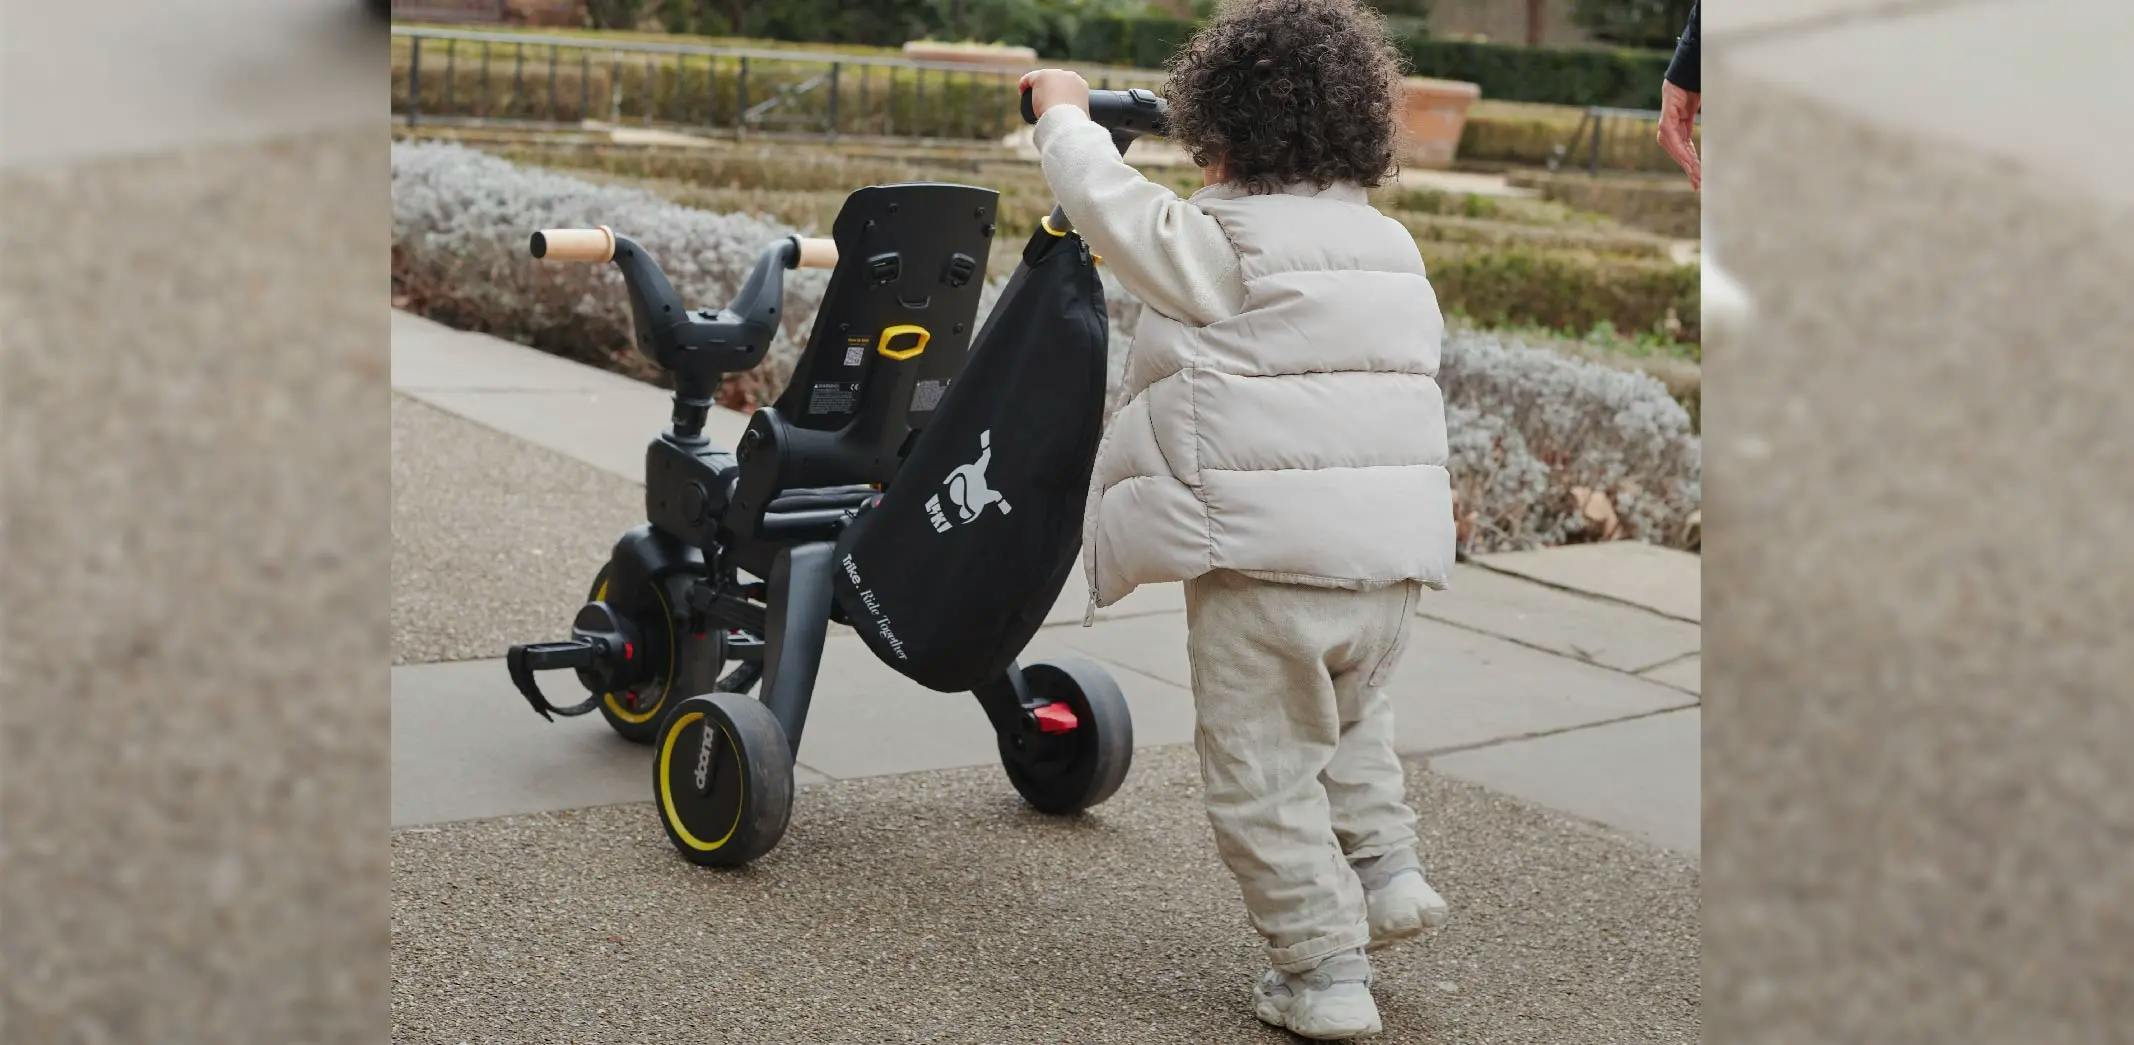 Holiday gift ideas for toddlers - Liki Trike